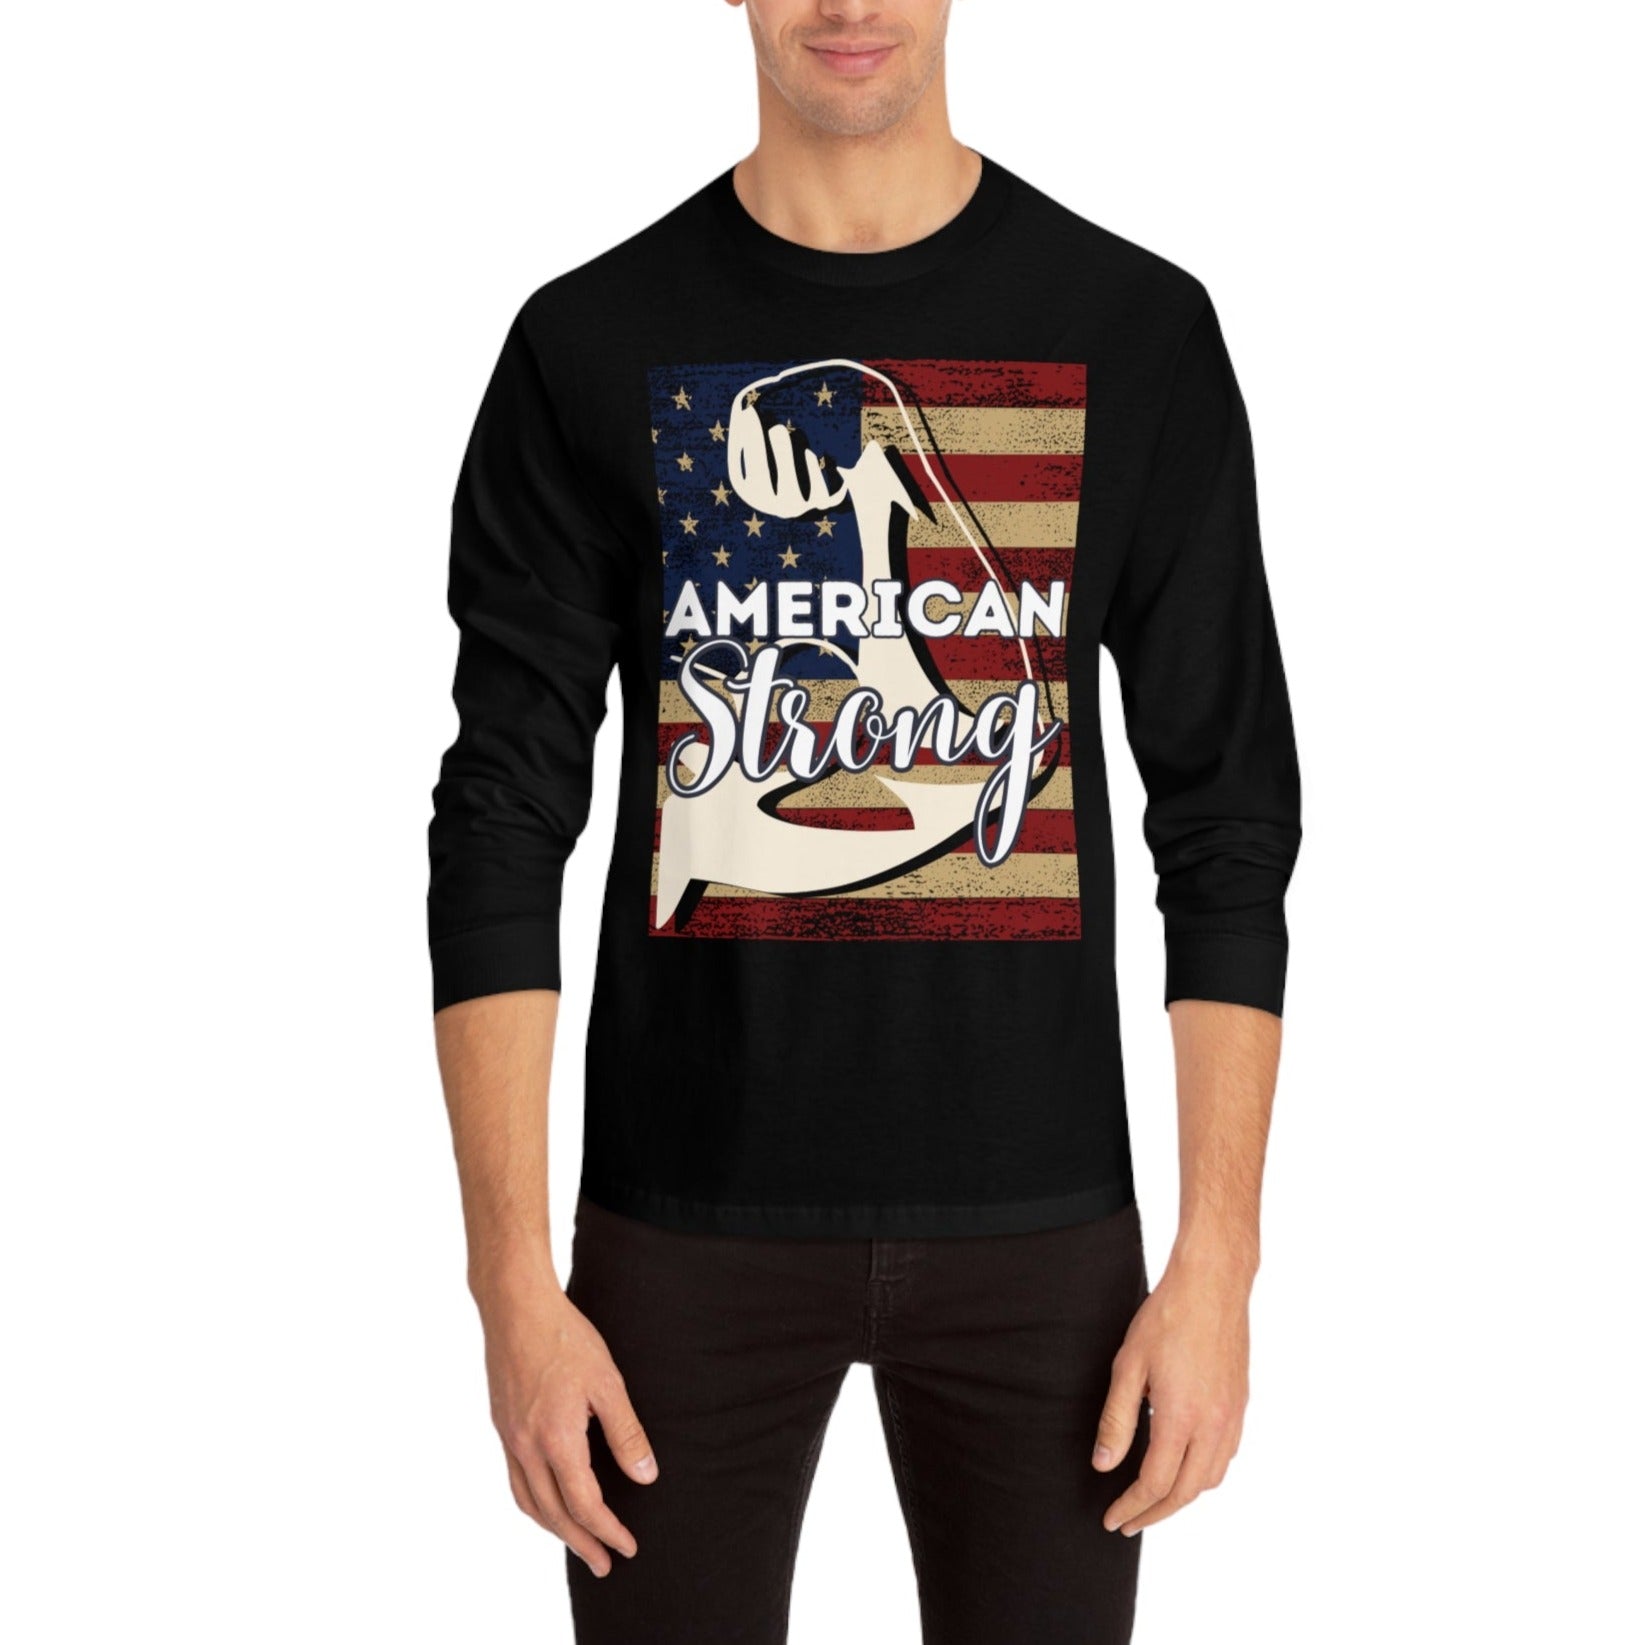 American Strong - Unisex Jersey Long Sleeve Tee